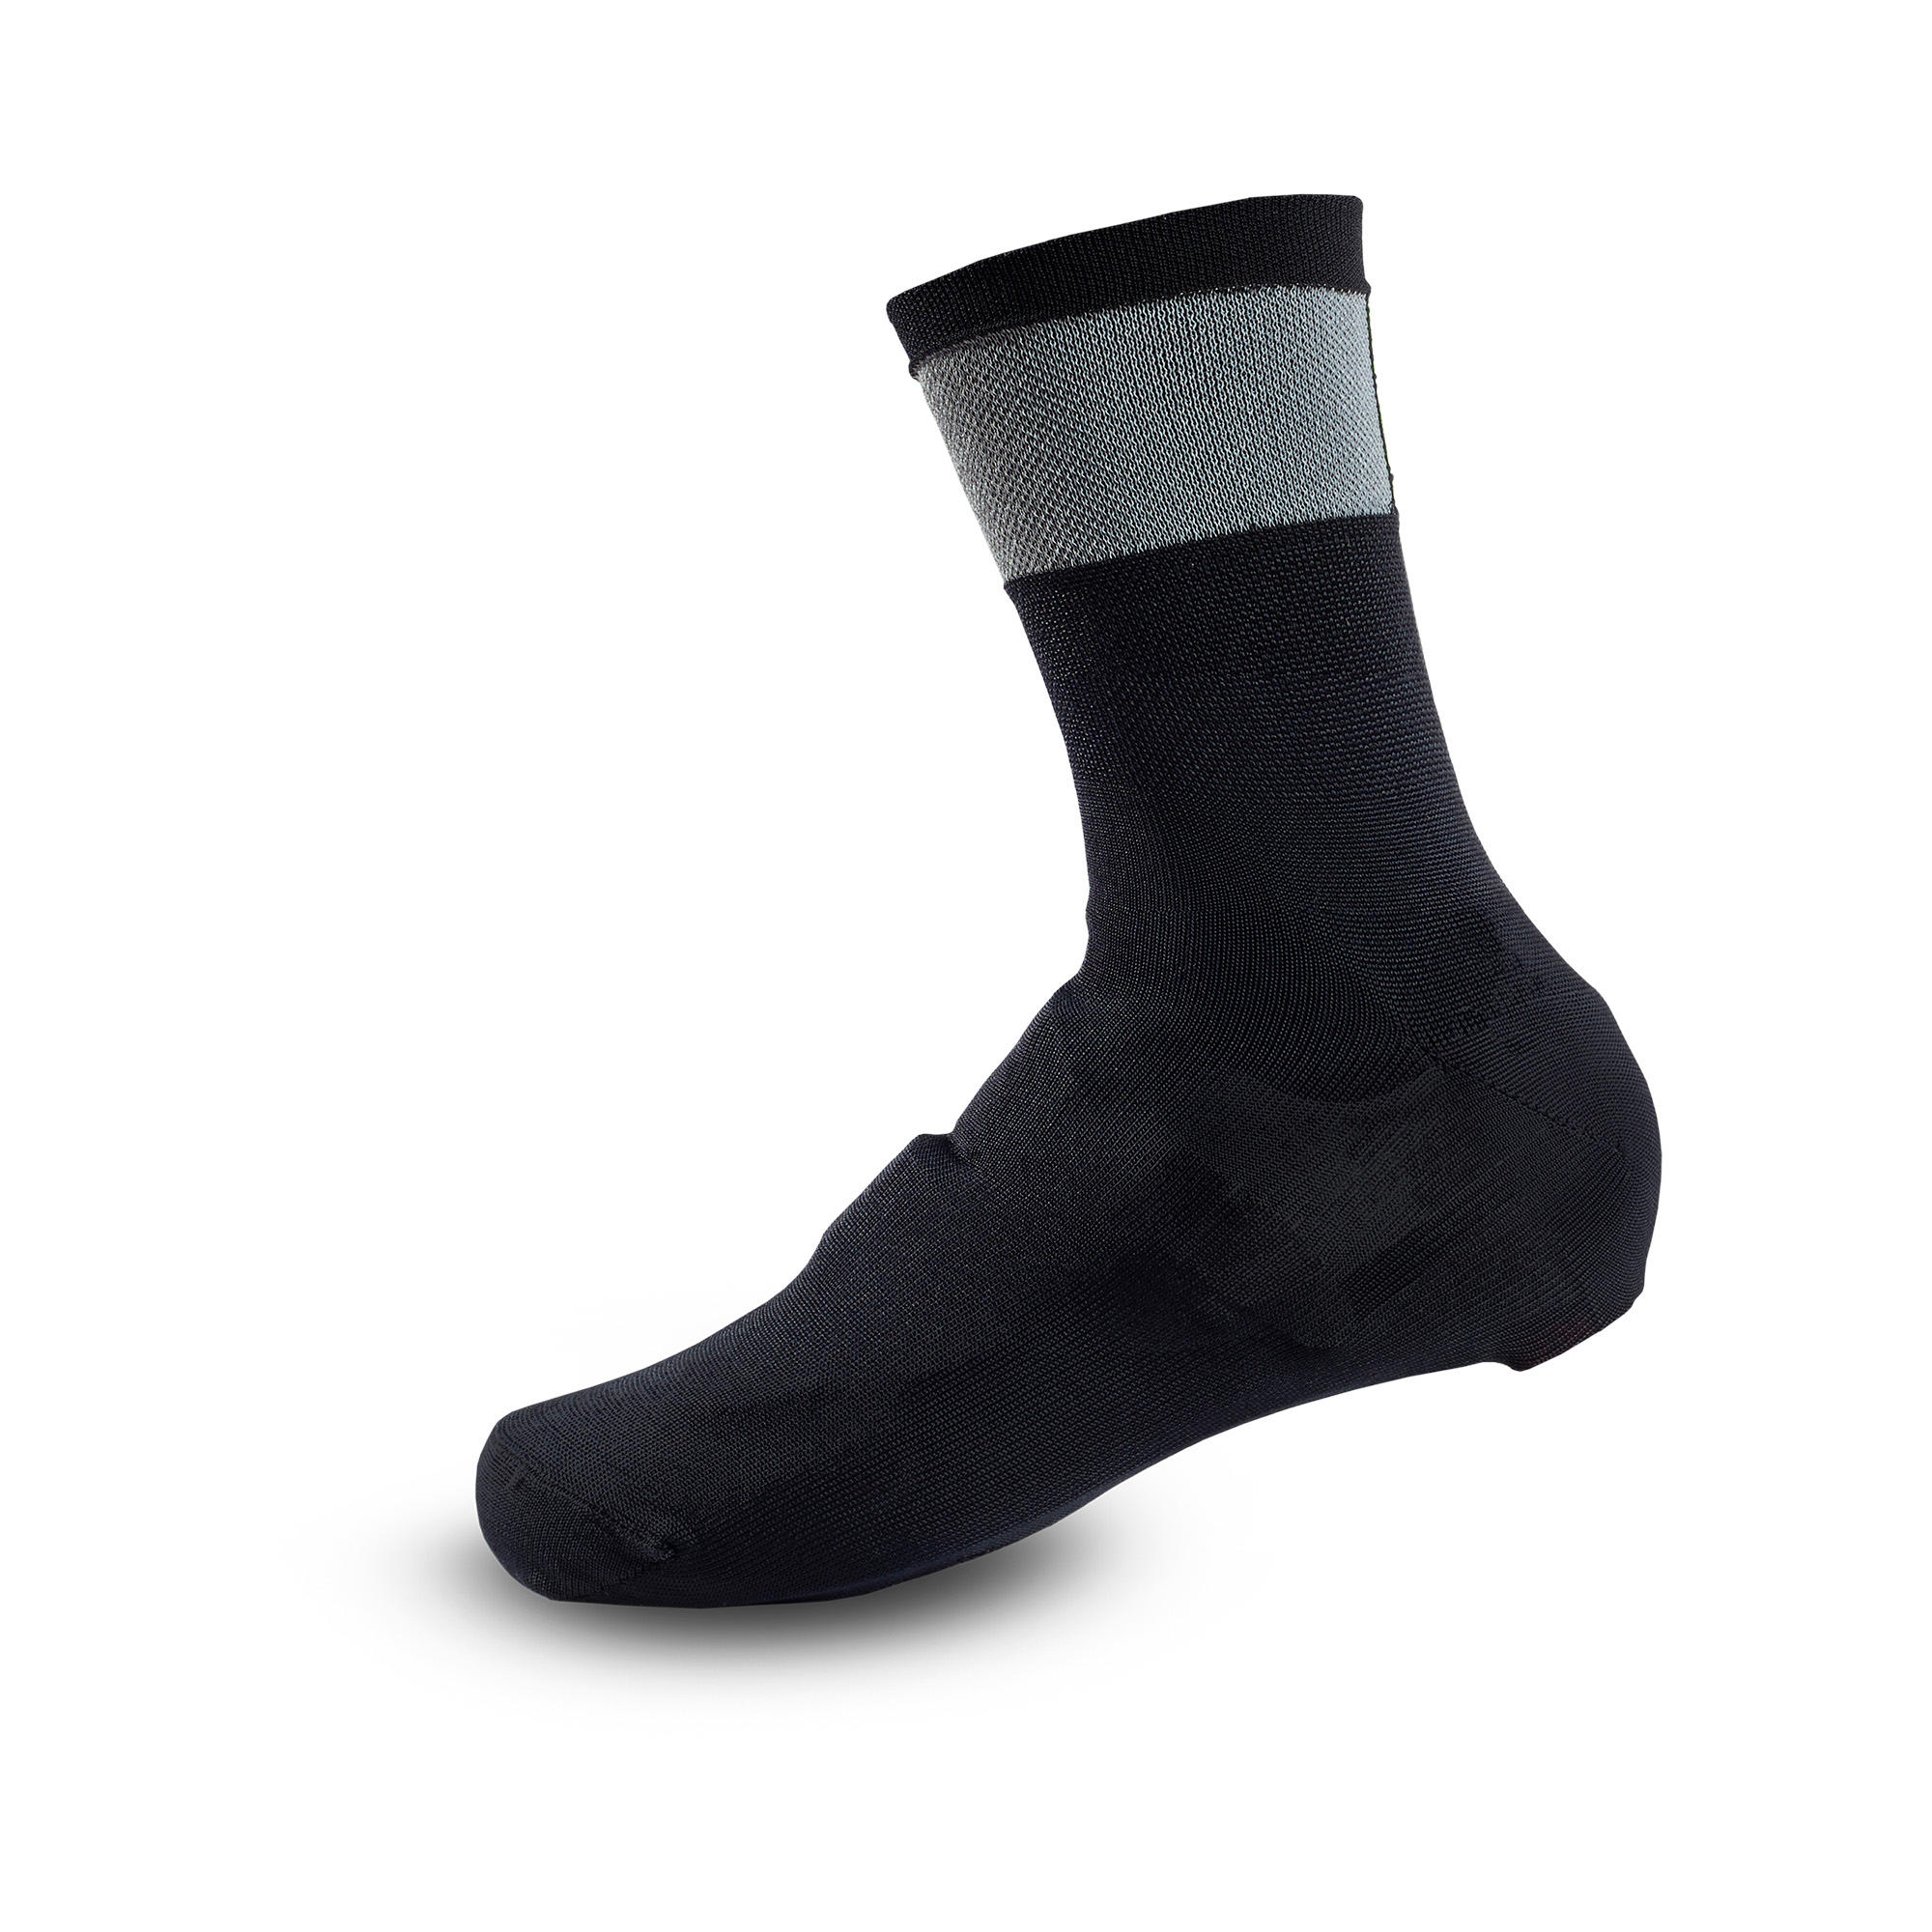 Knitted Cycling Overshoes - Black 8/8